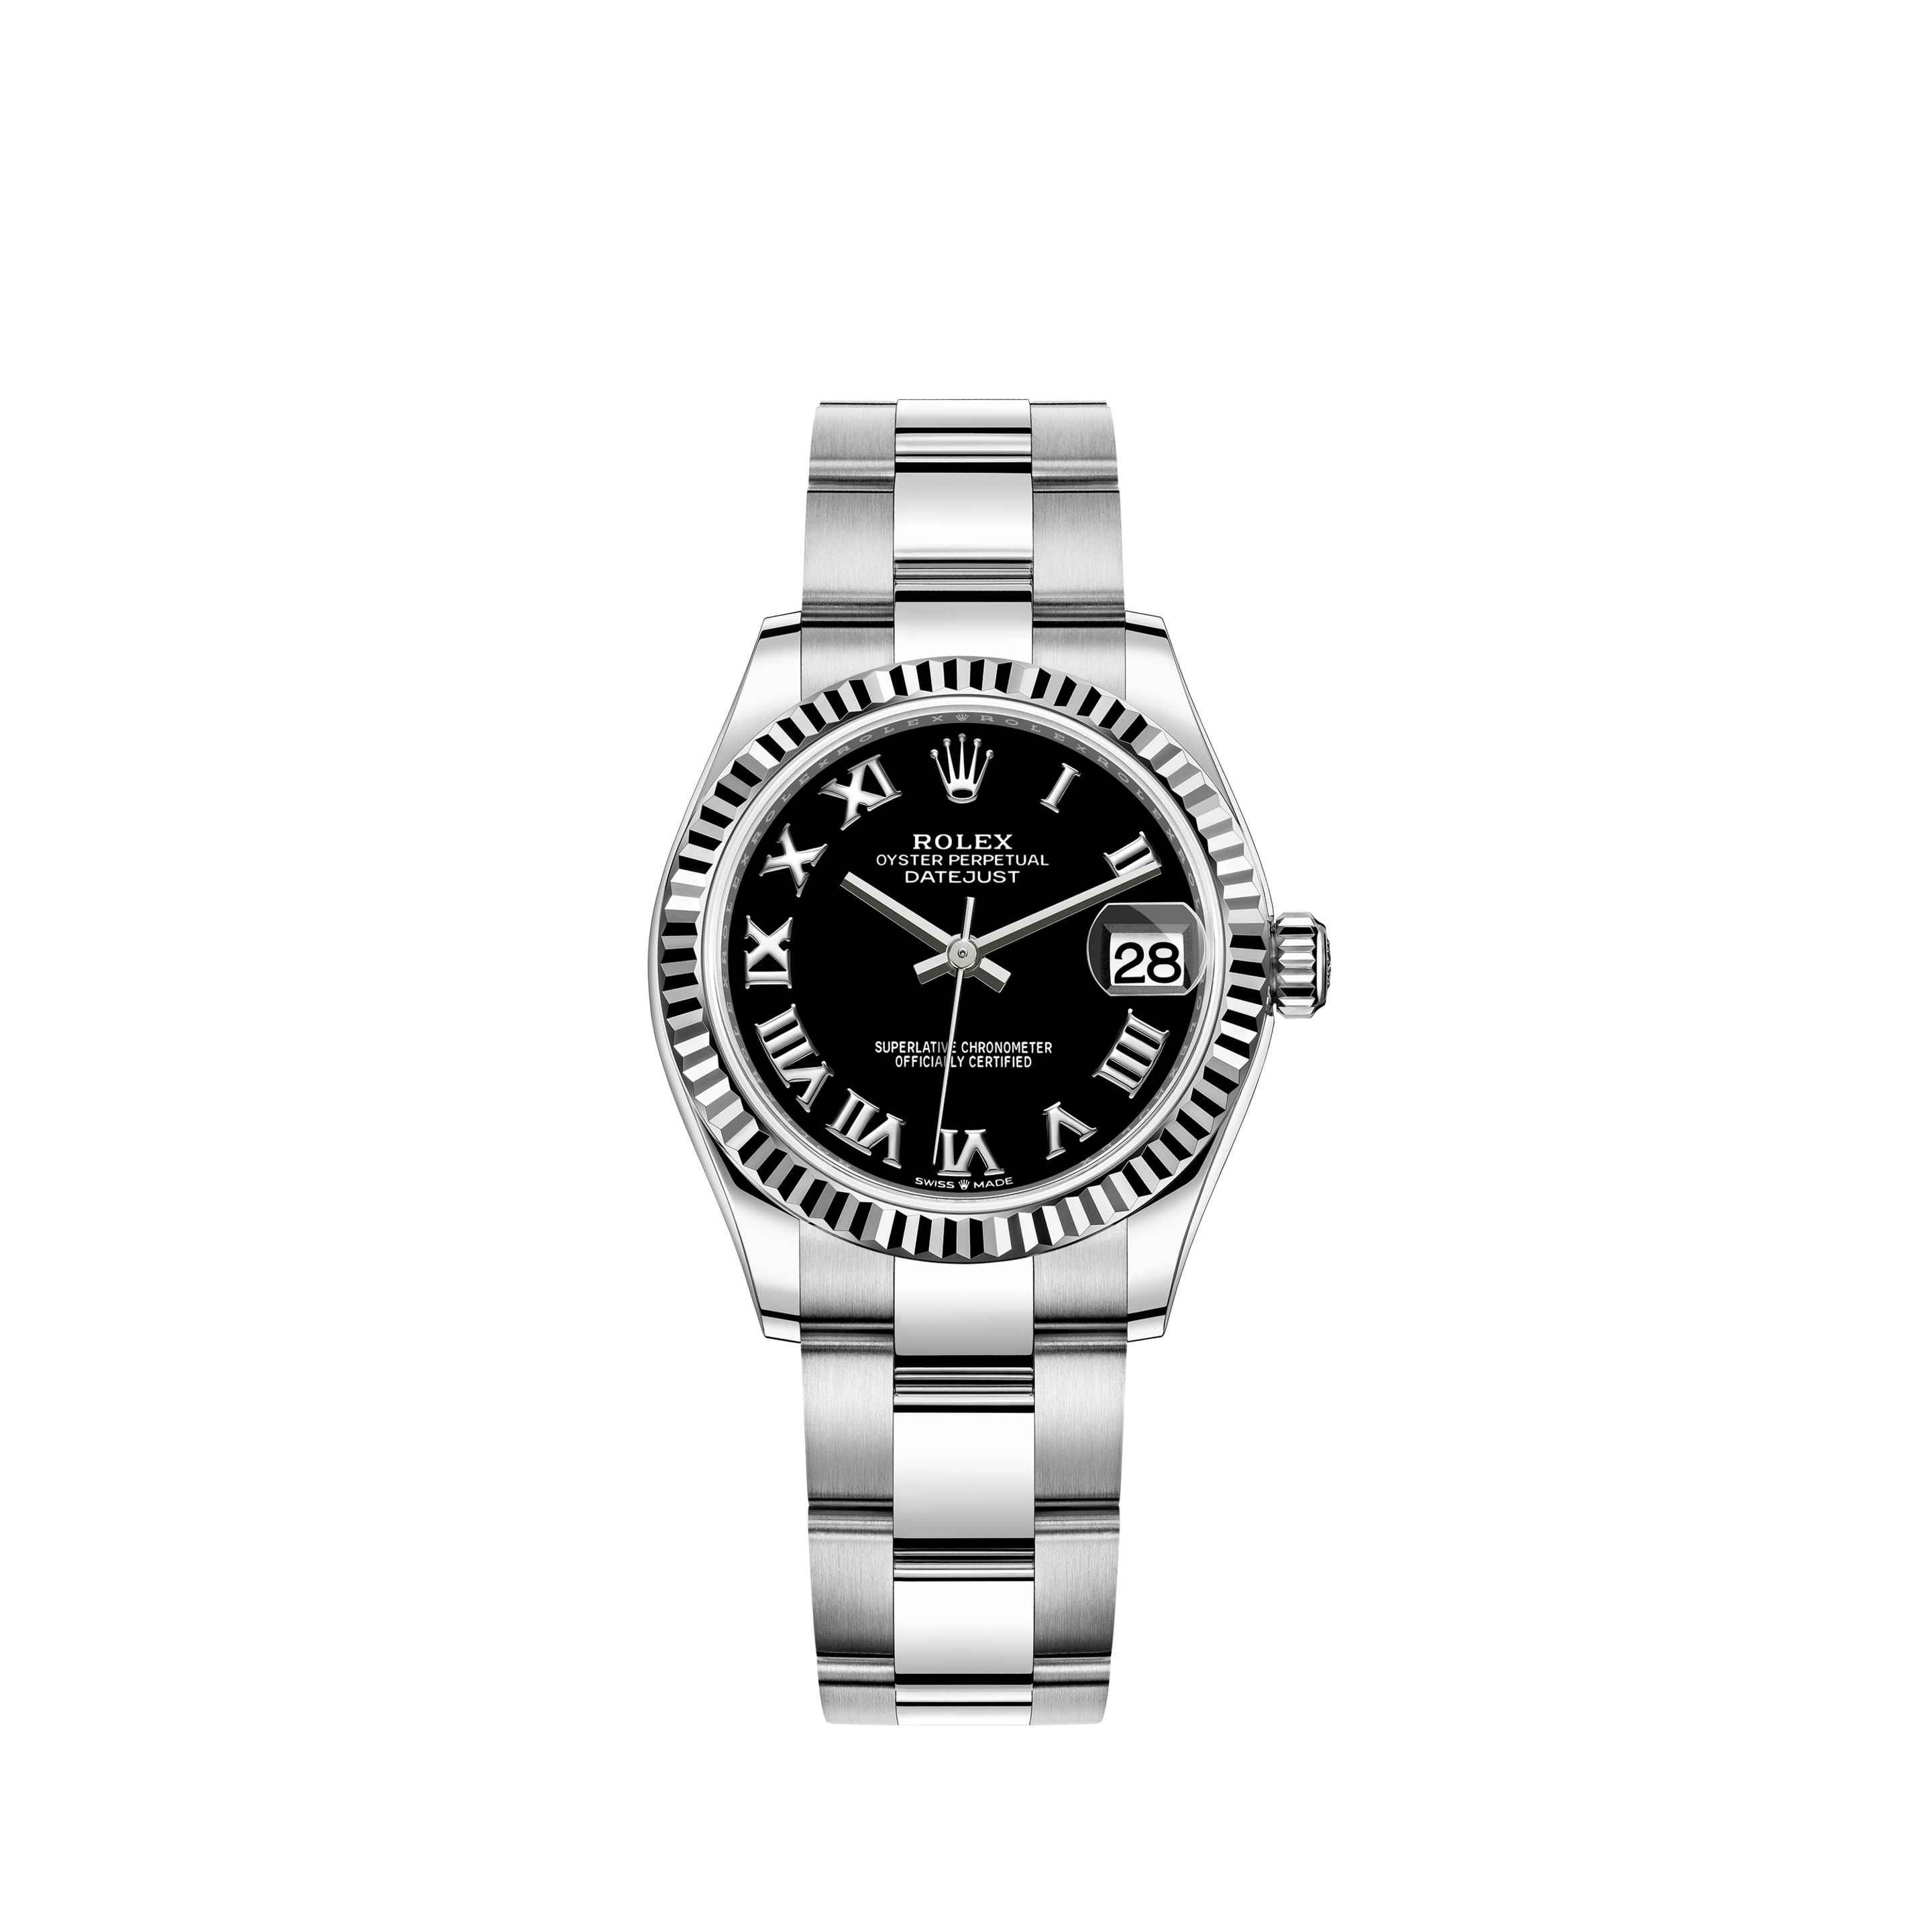 Datejust 31 278274 White Gold & Stainless Steel Watch (Bright Black)